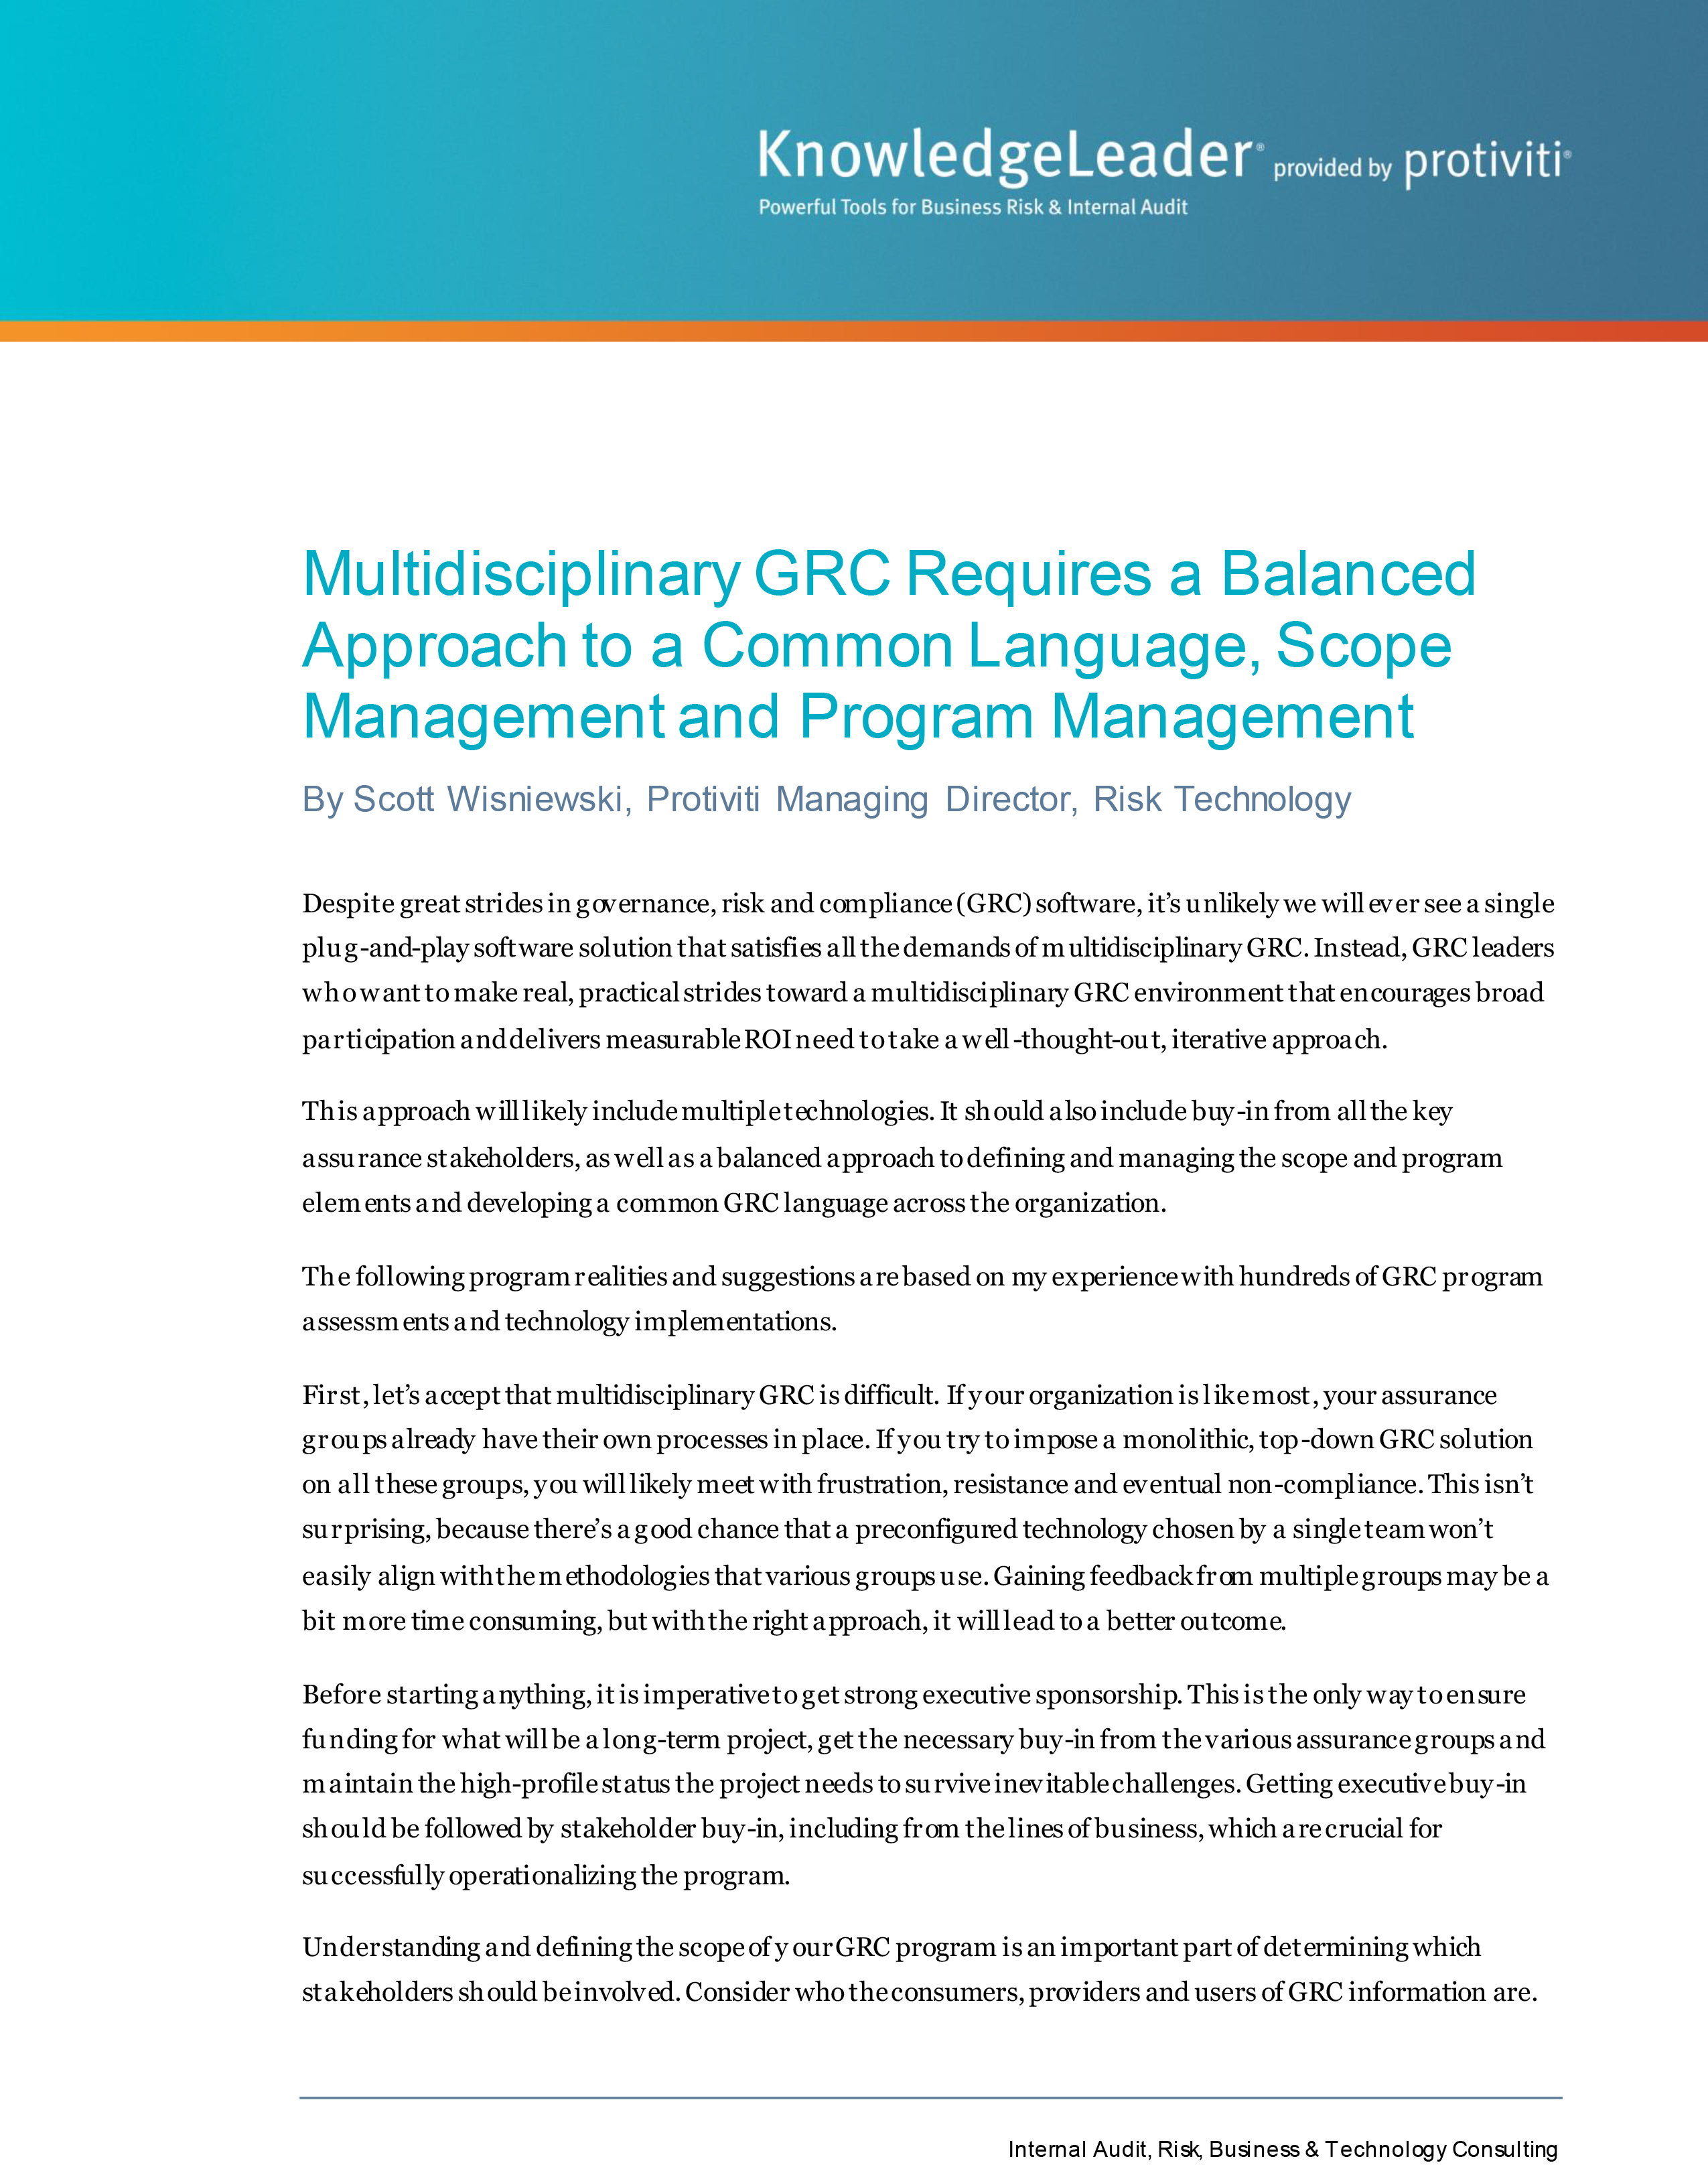 Screenshot of the first page of Multidisciplinary GRC Requires a Balanced Approach to a Common Language, Scope Management and Program Management